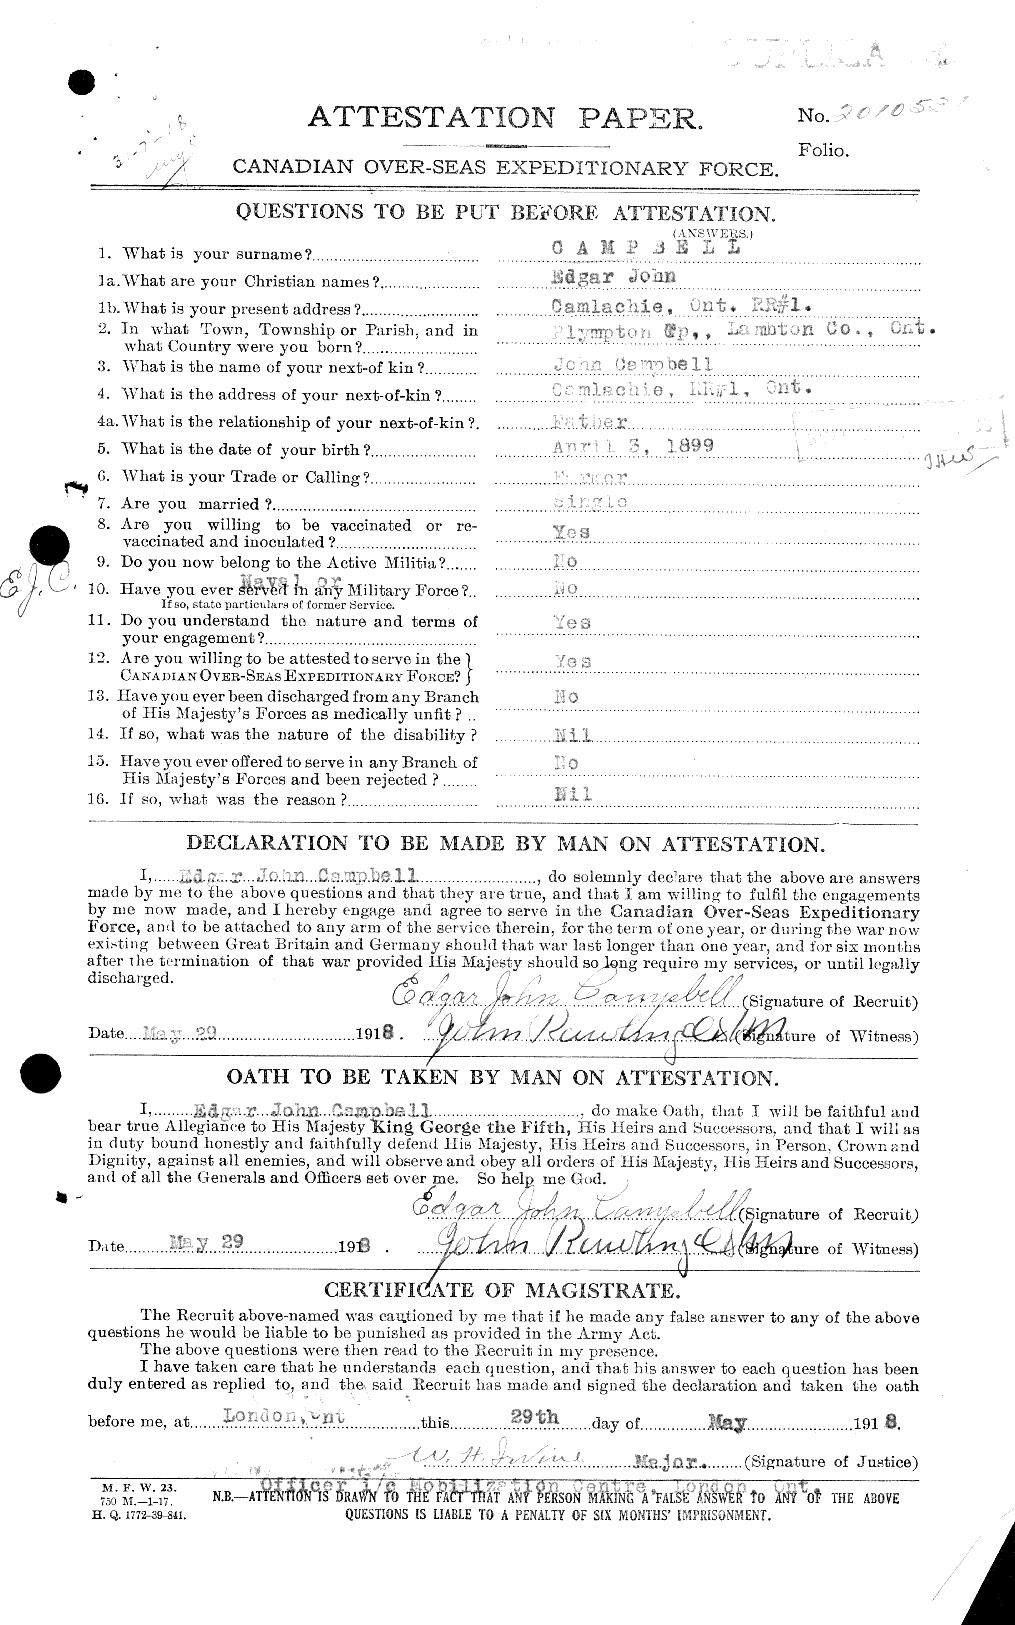 Personnel Records of the First World War - CEF 008244a